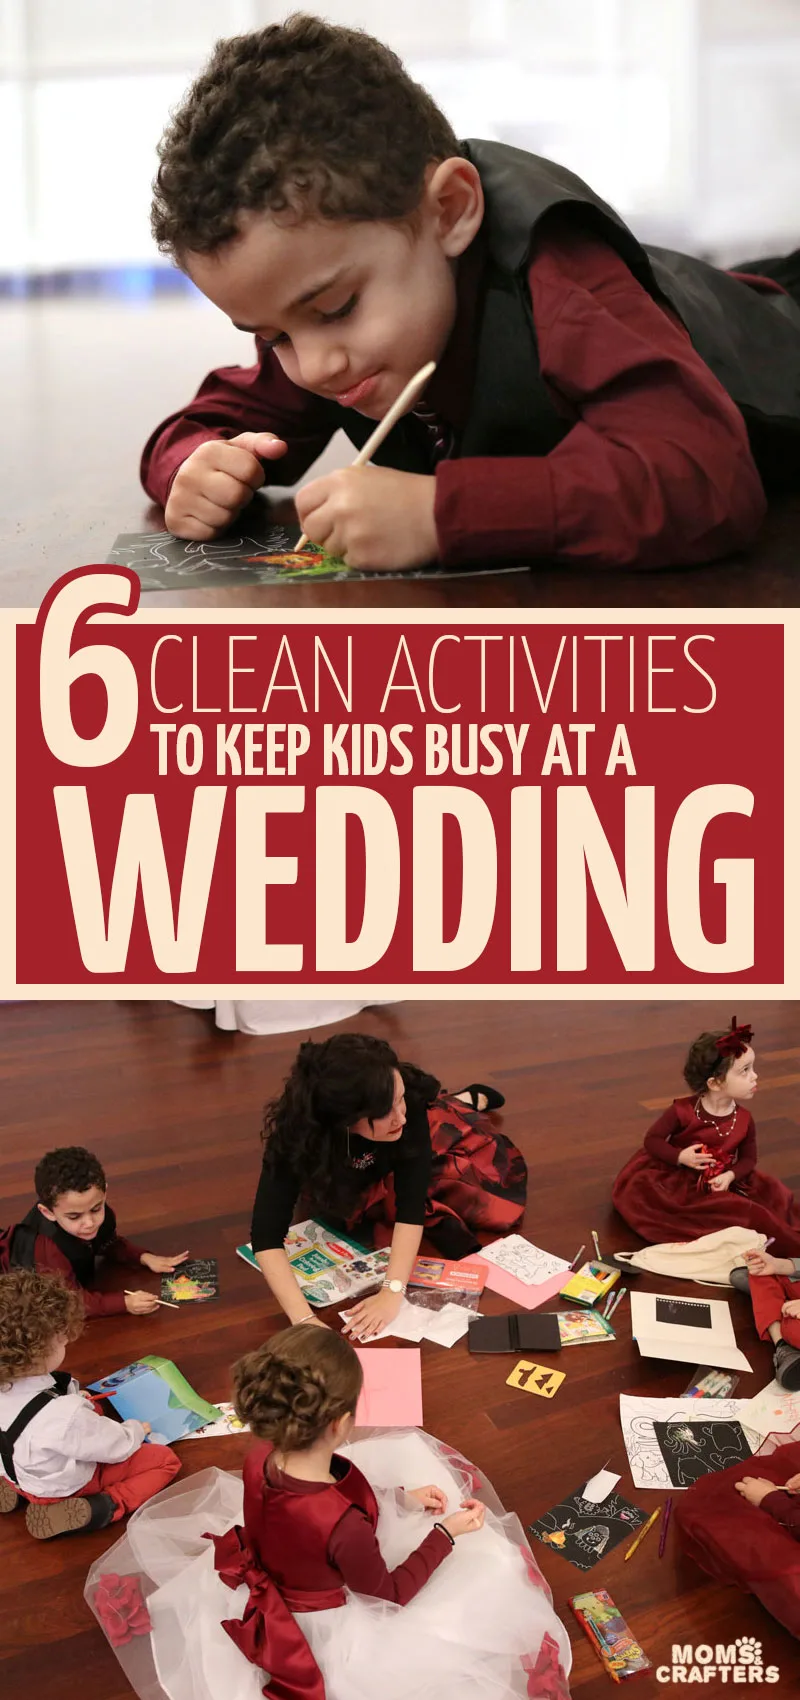 6 Ideas for entertaning kids at a wedding - quiet, mess-free creative activities for toddler through tween to do while available for photos at a wedding. #wedding #kidsactivities #messfreecrafts